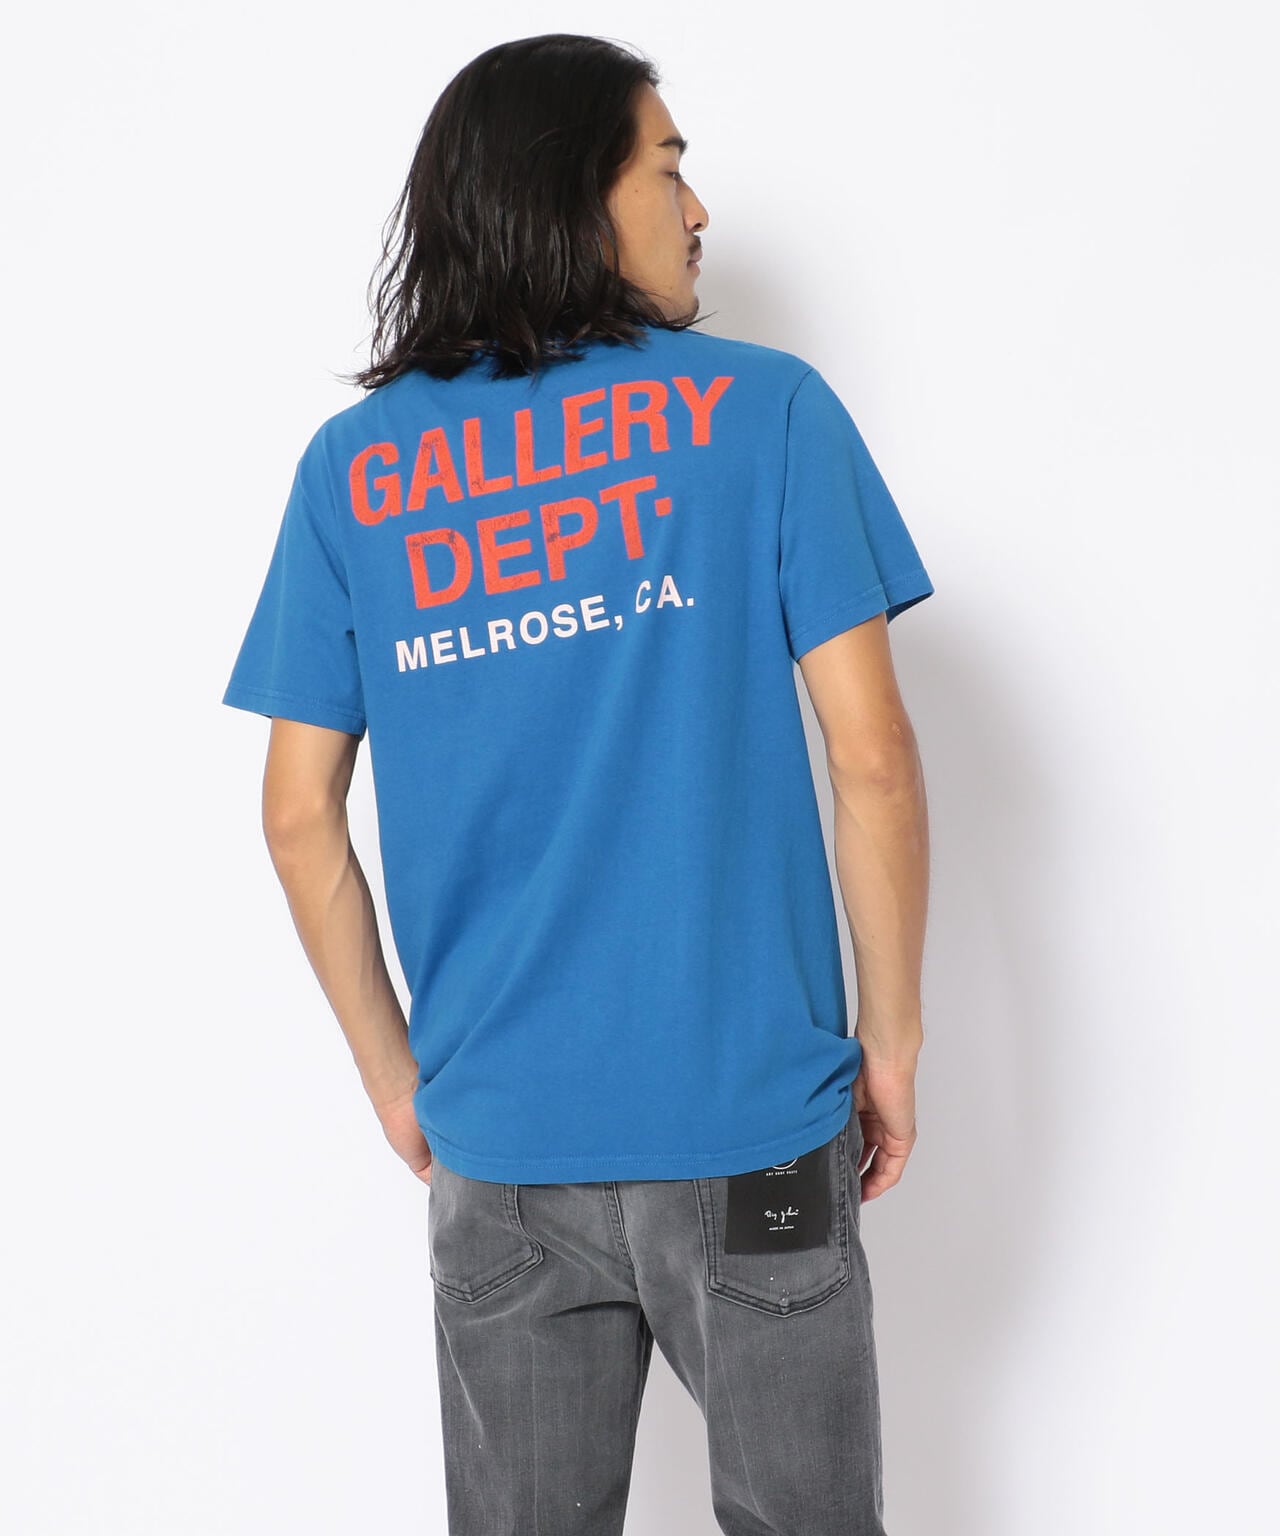 Central Cee 着用 gallery dept Tシャツ - agedor.ma